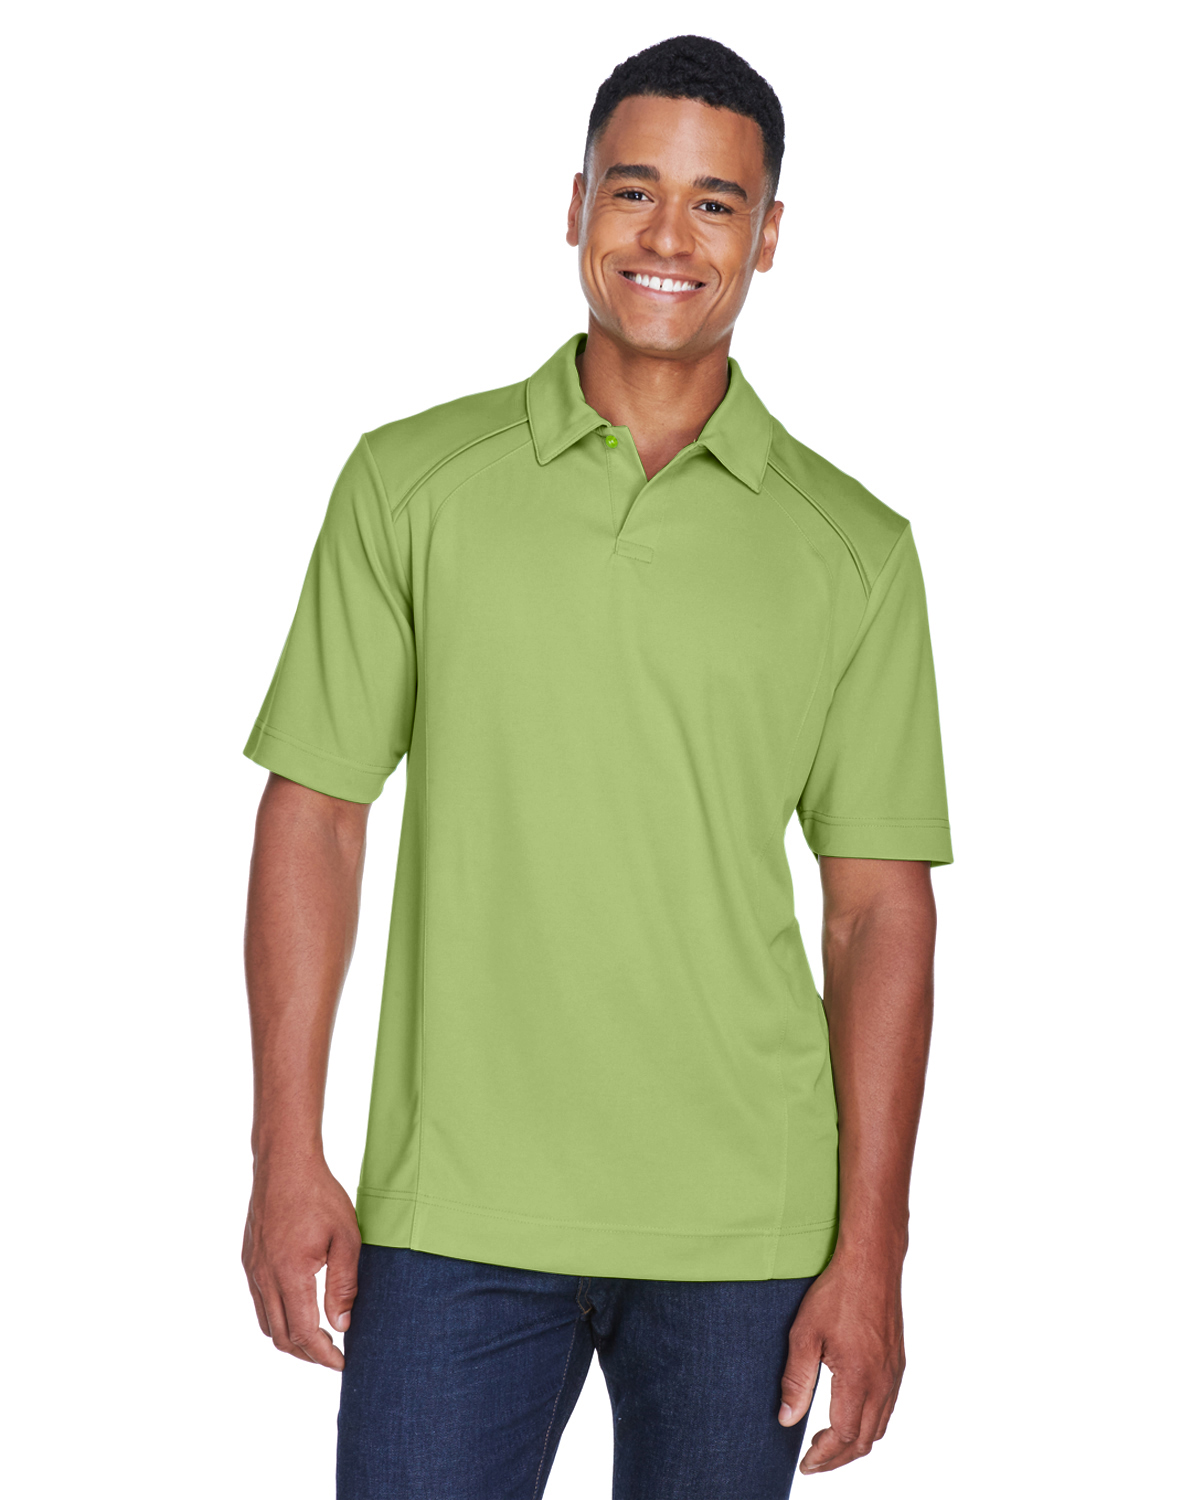 88632 Ash City - North End Men\'s Recycled Polyester Performance Piqué Polo